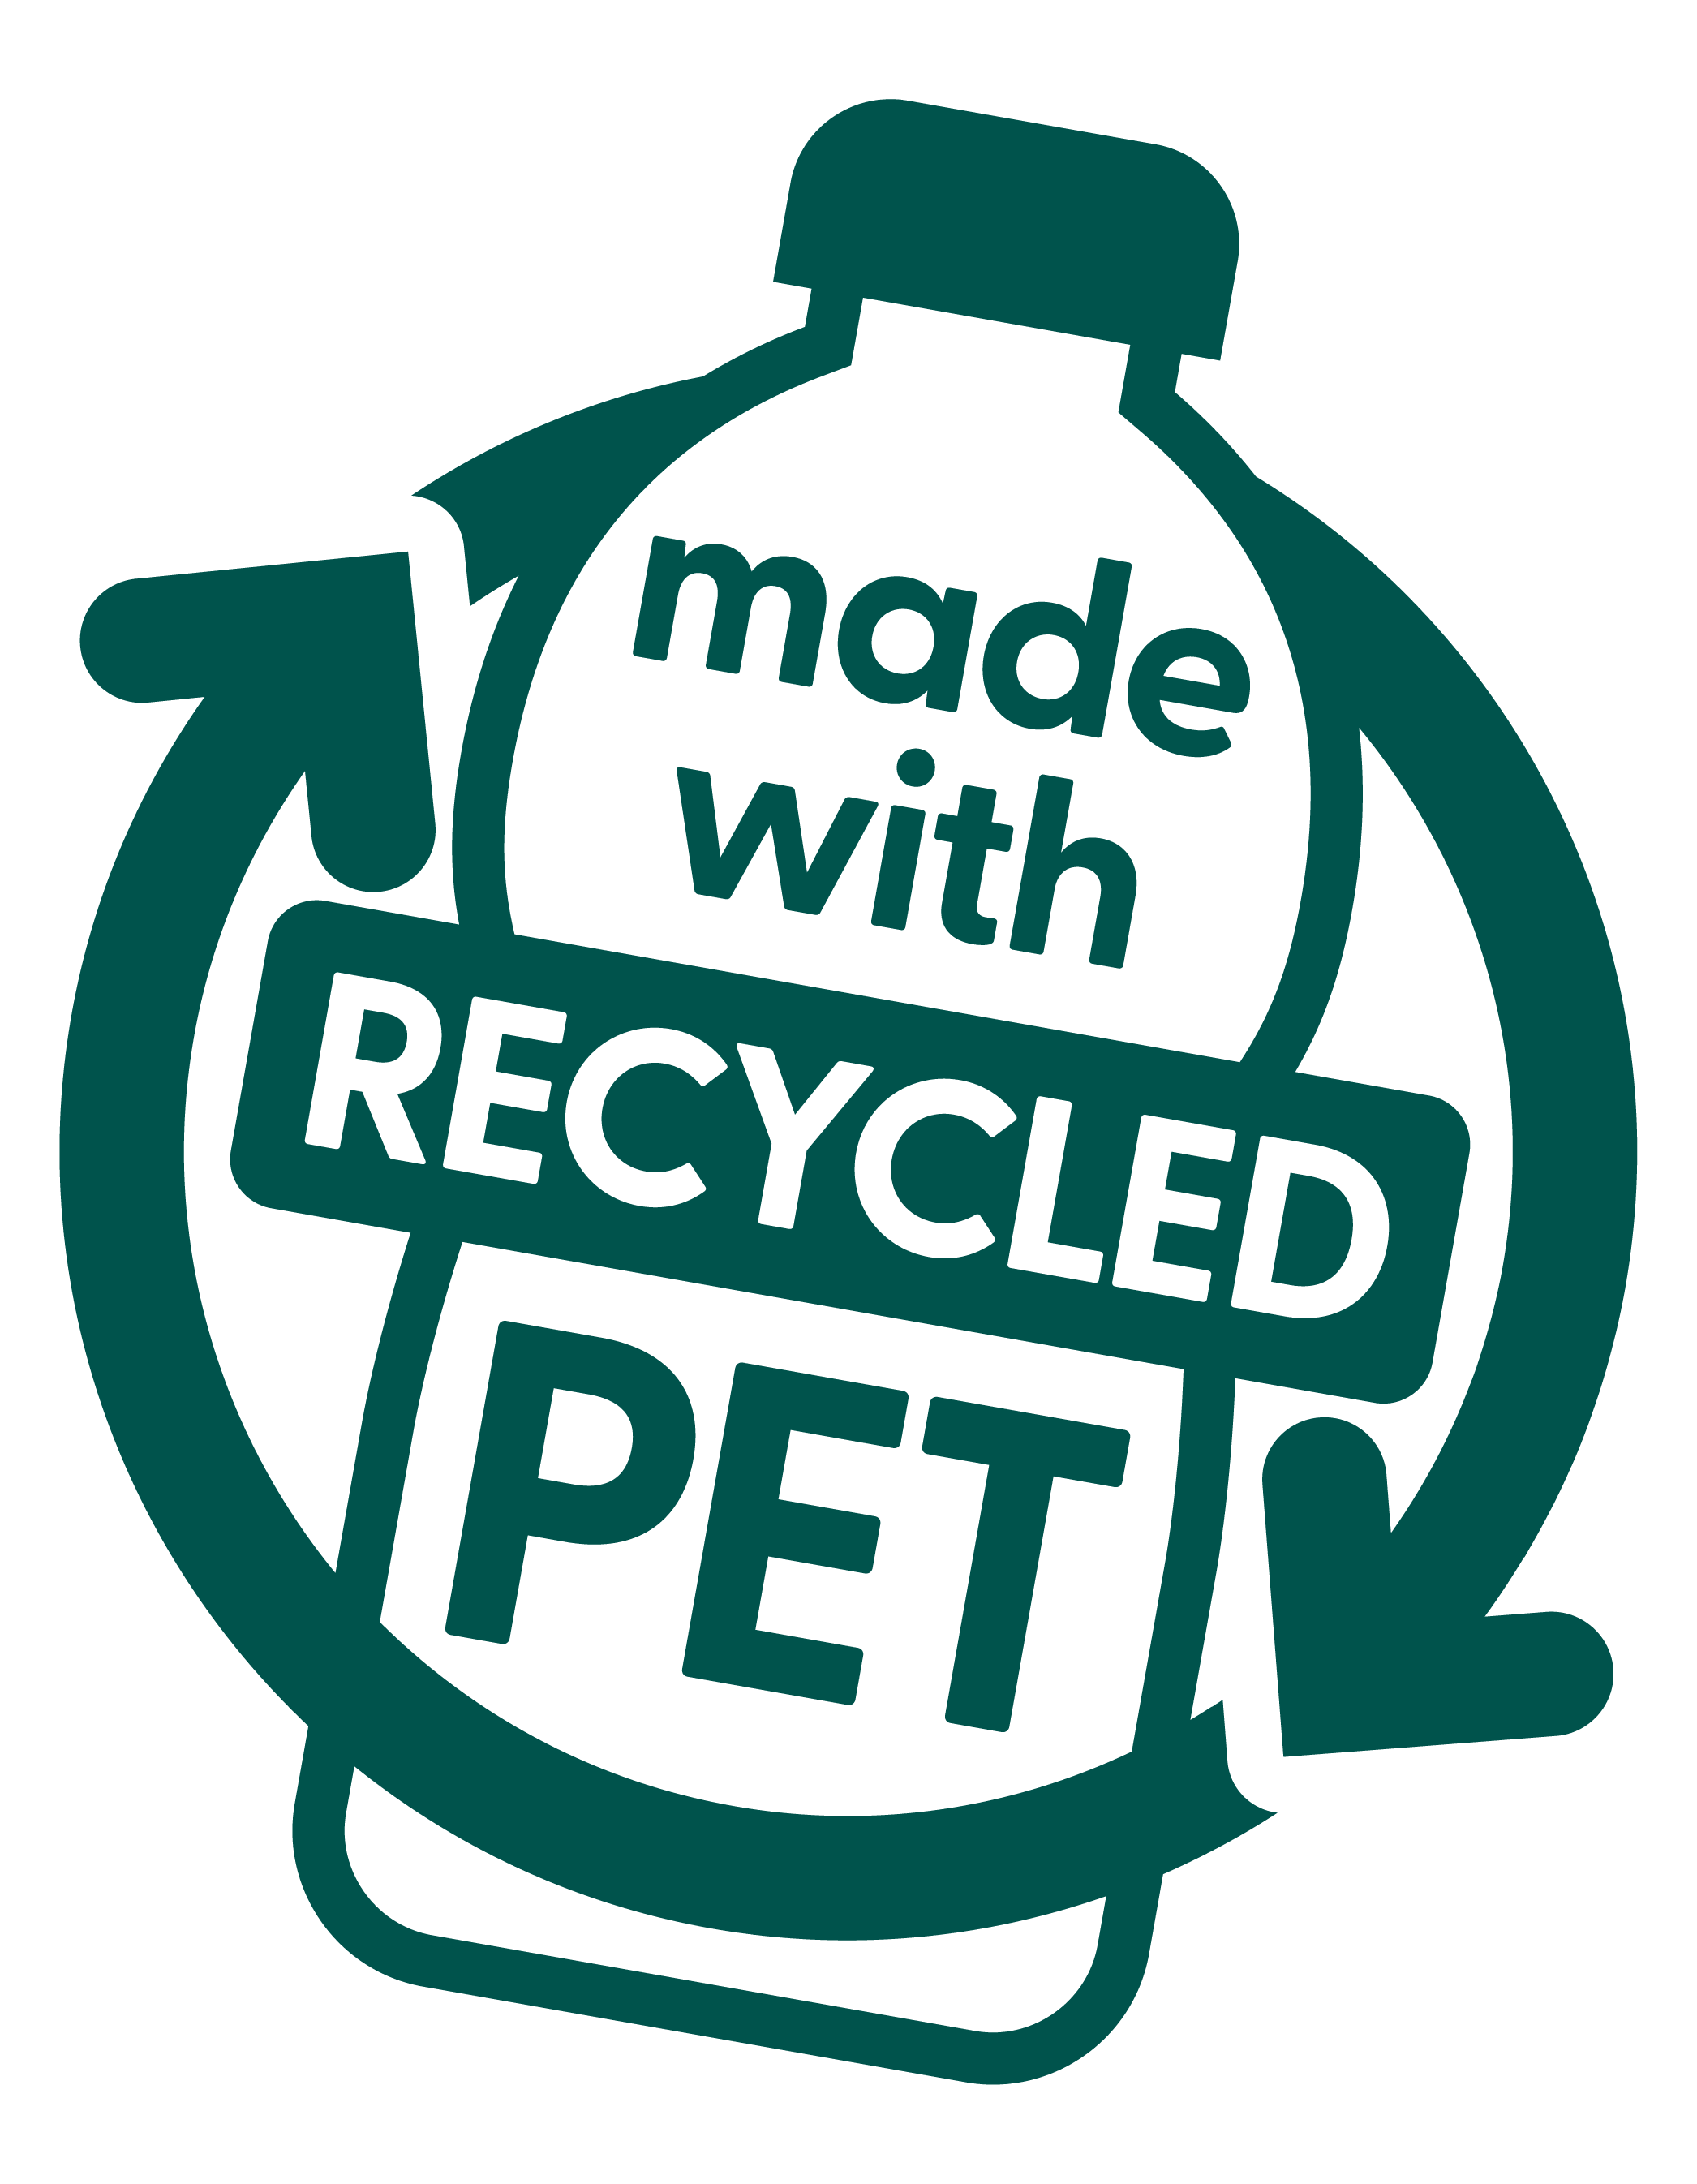 Make with recycled PET